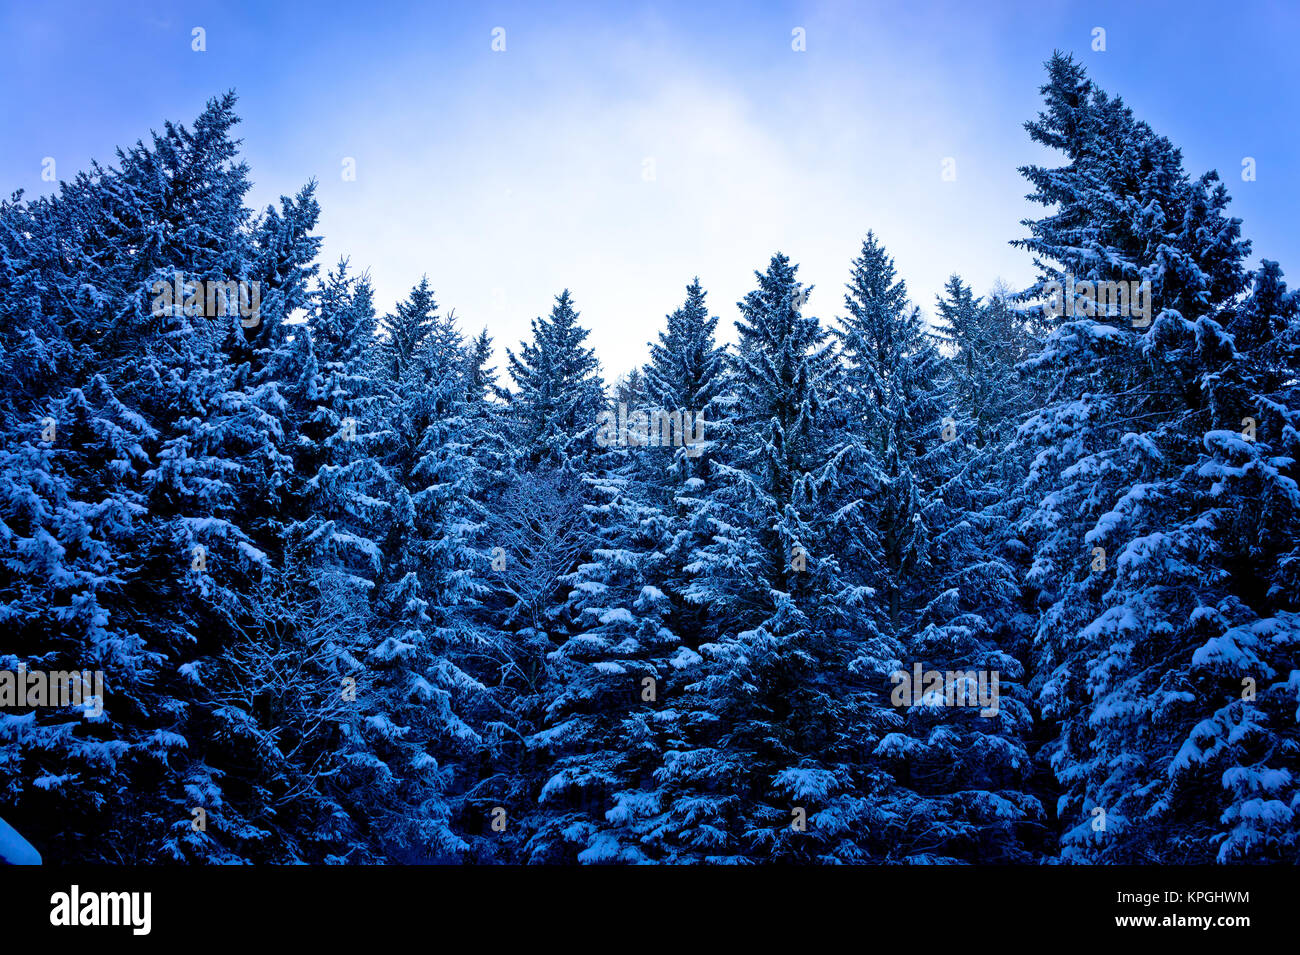 Alps pine forest in snow Stock Photo